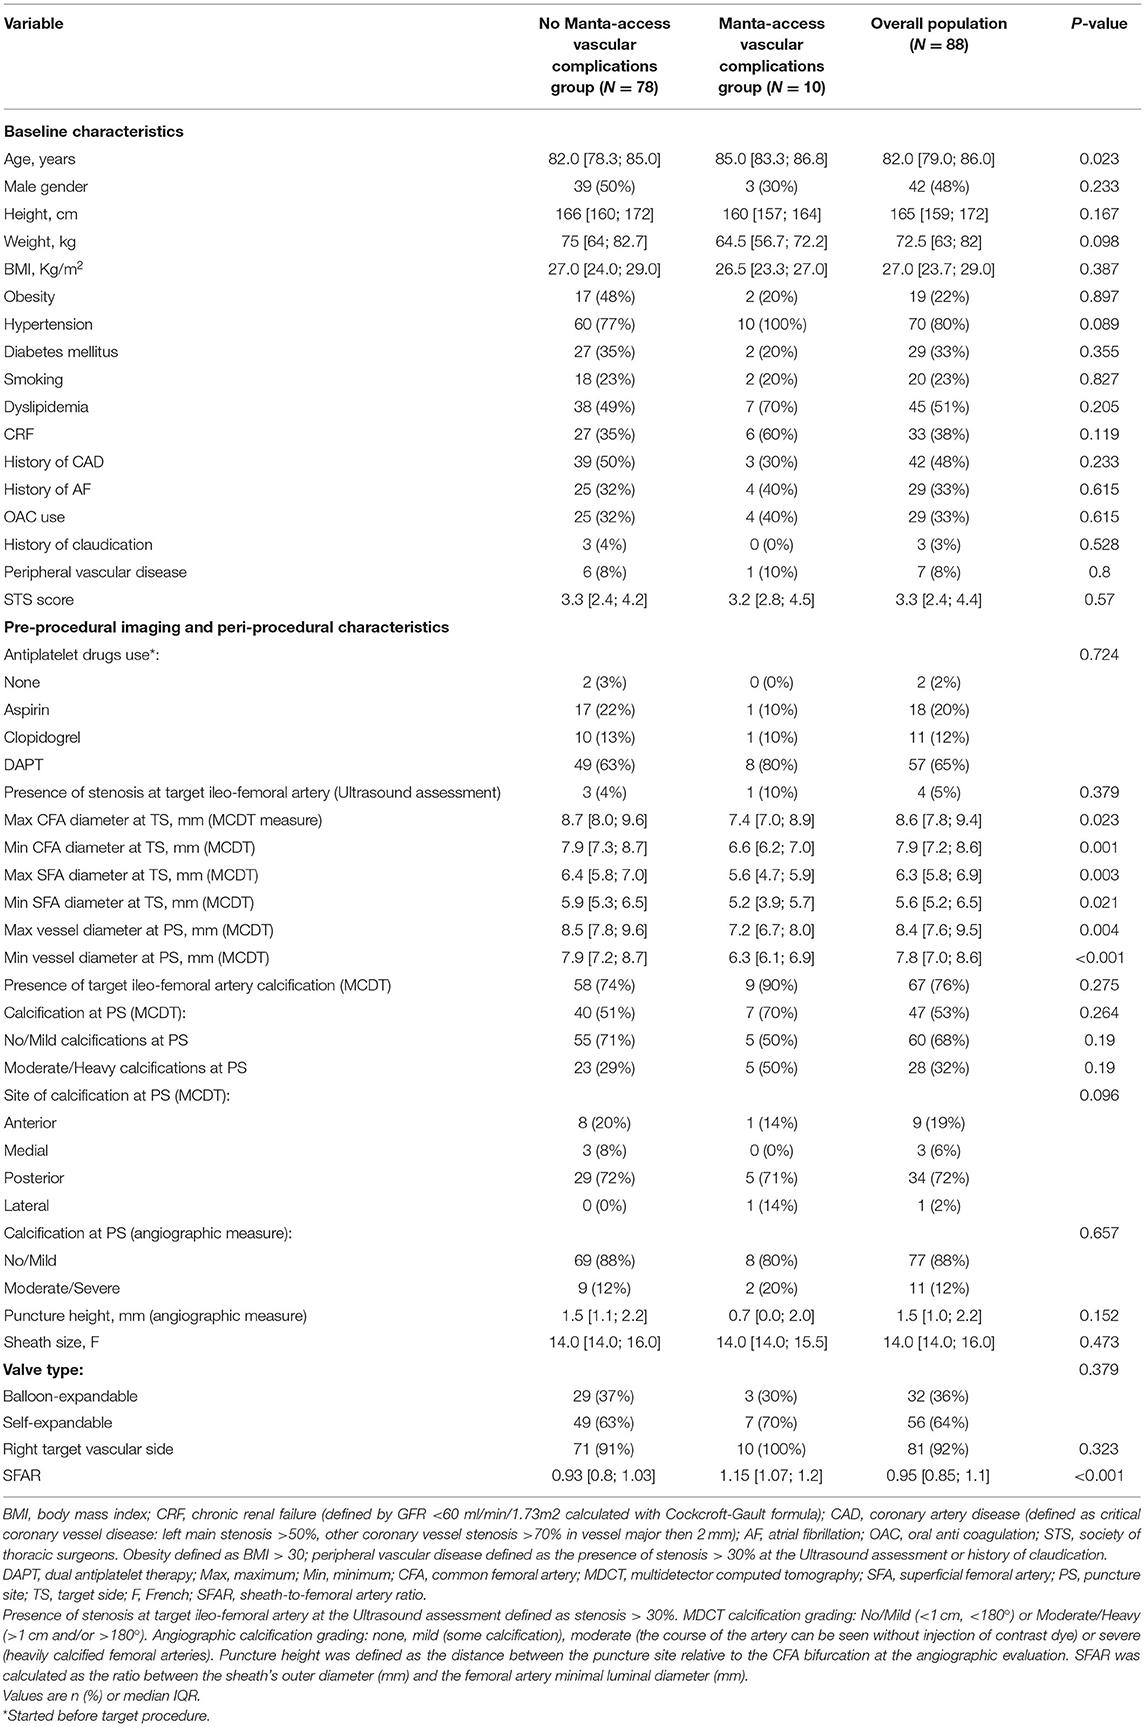 Frontiers  Real-World Experience With a Large Bore Vascular Closure Device  During TAVI Procedure: Features and Predictors of Access-Site Vascular  Complications